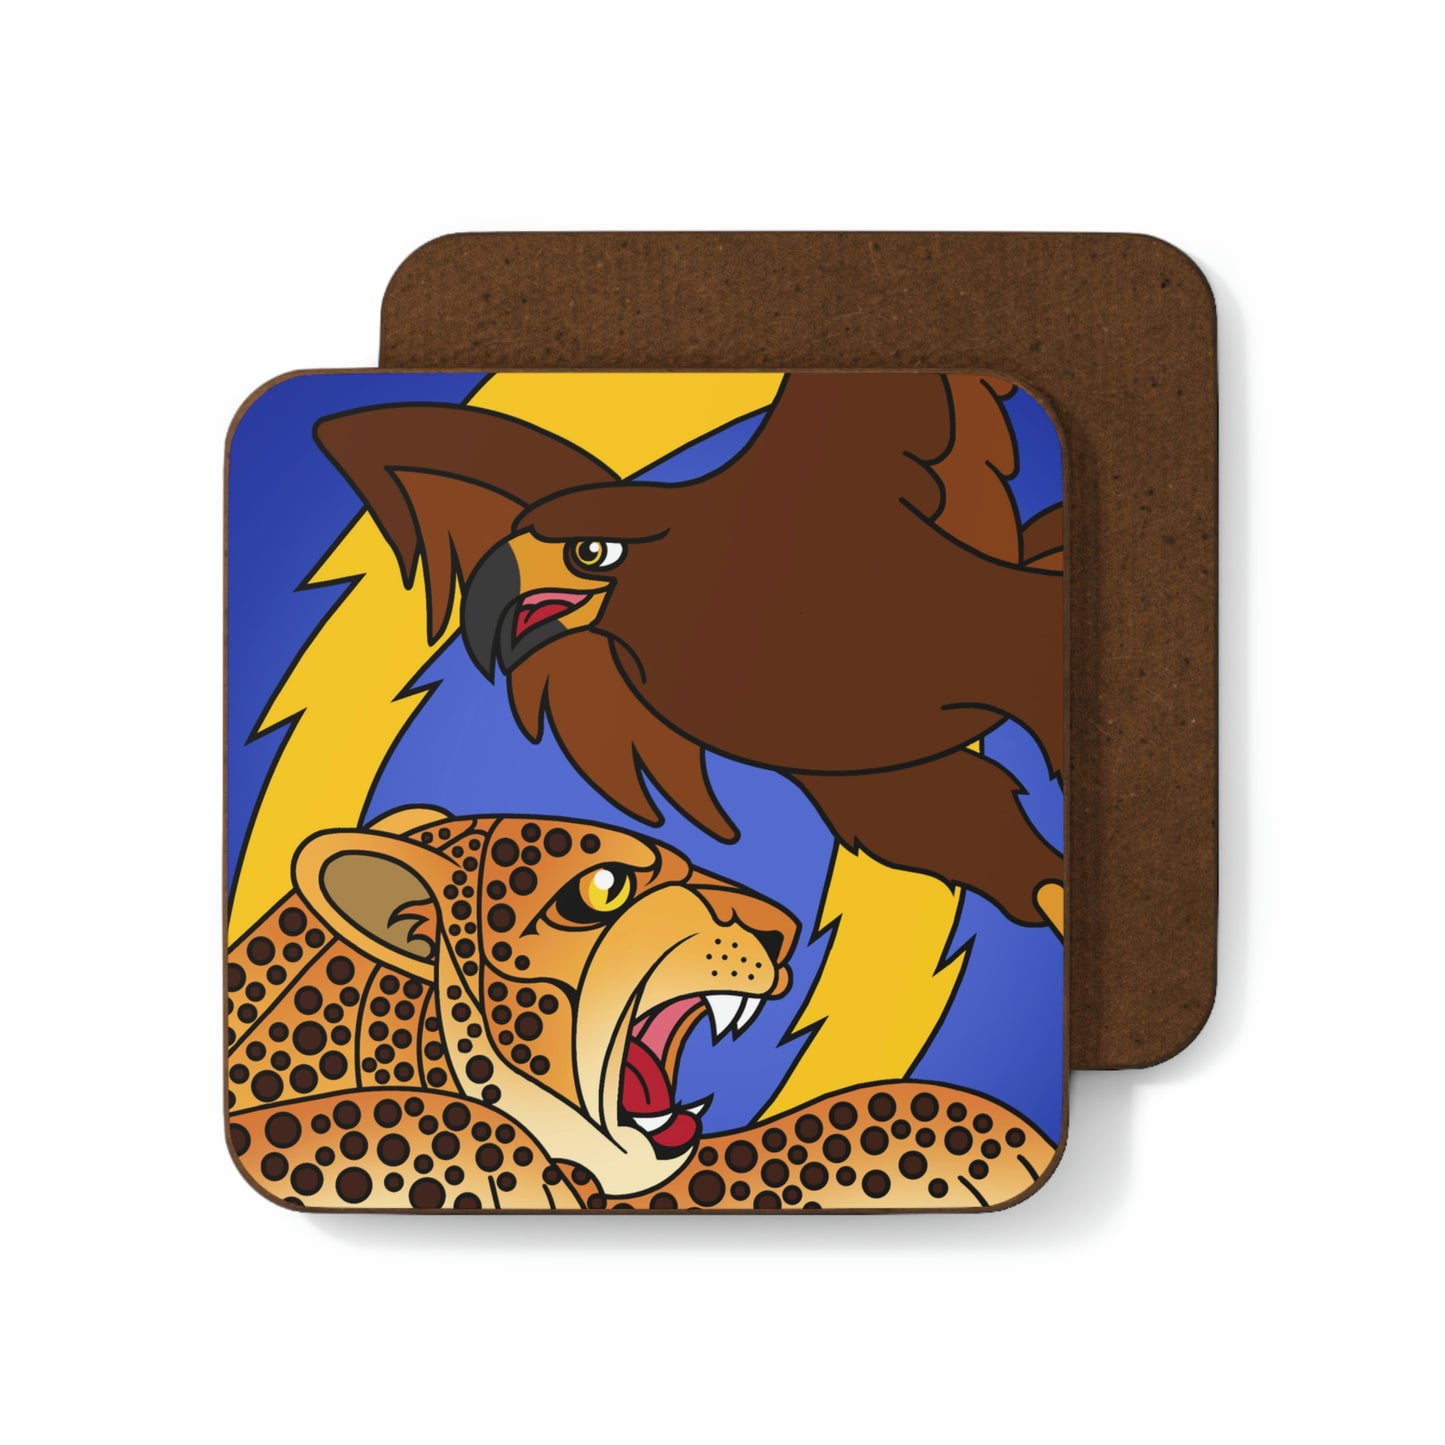 The Paramount Chief and One Wise Woman! Hardboard Back Coaster